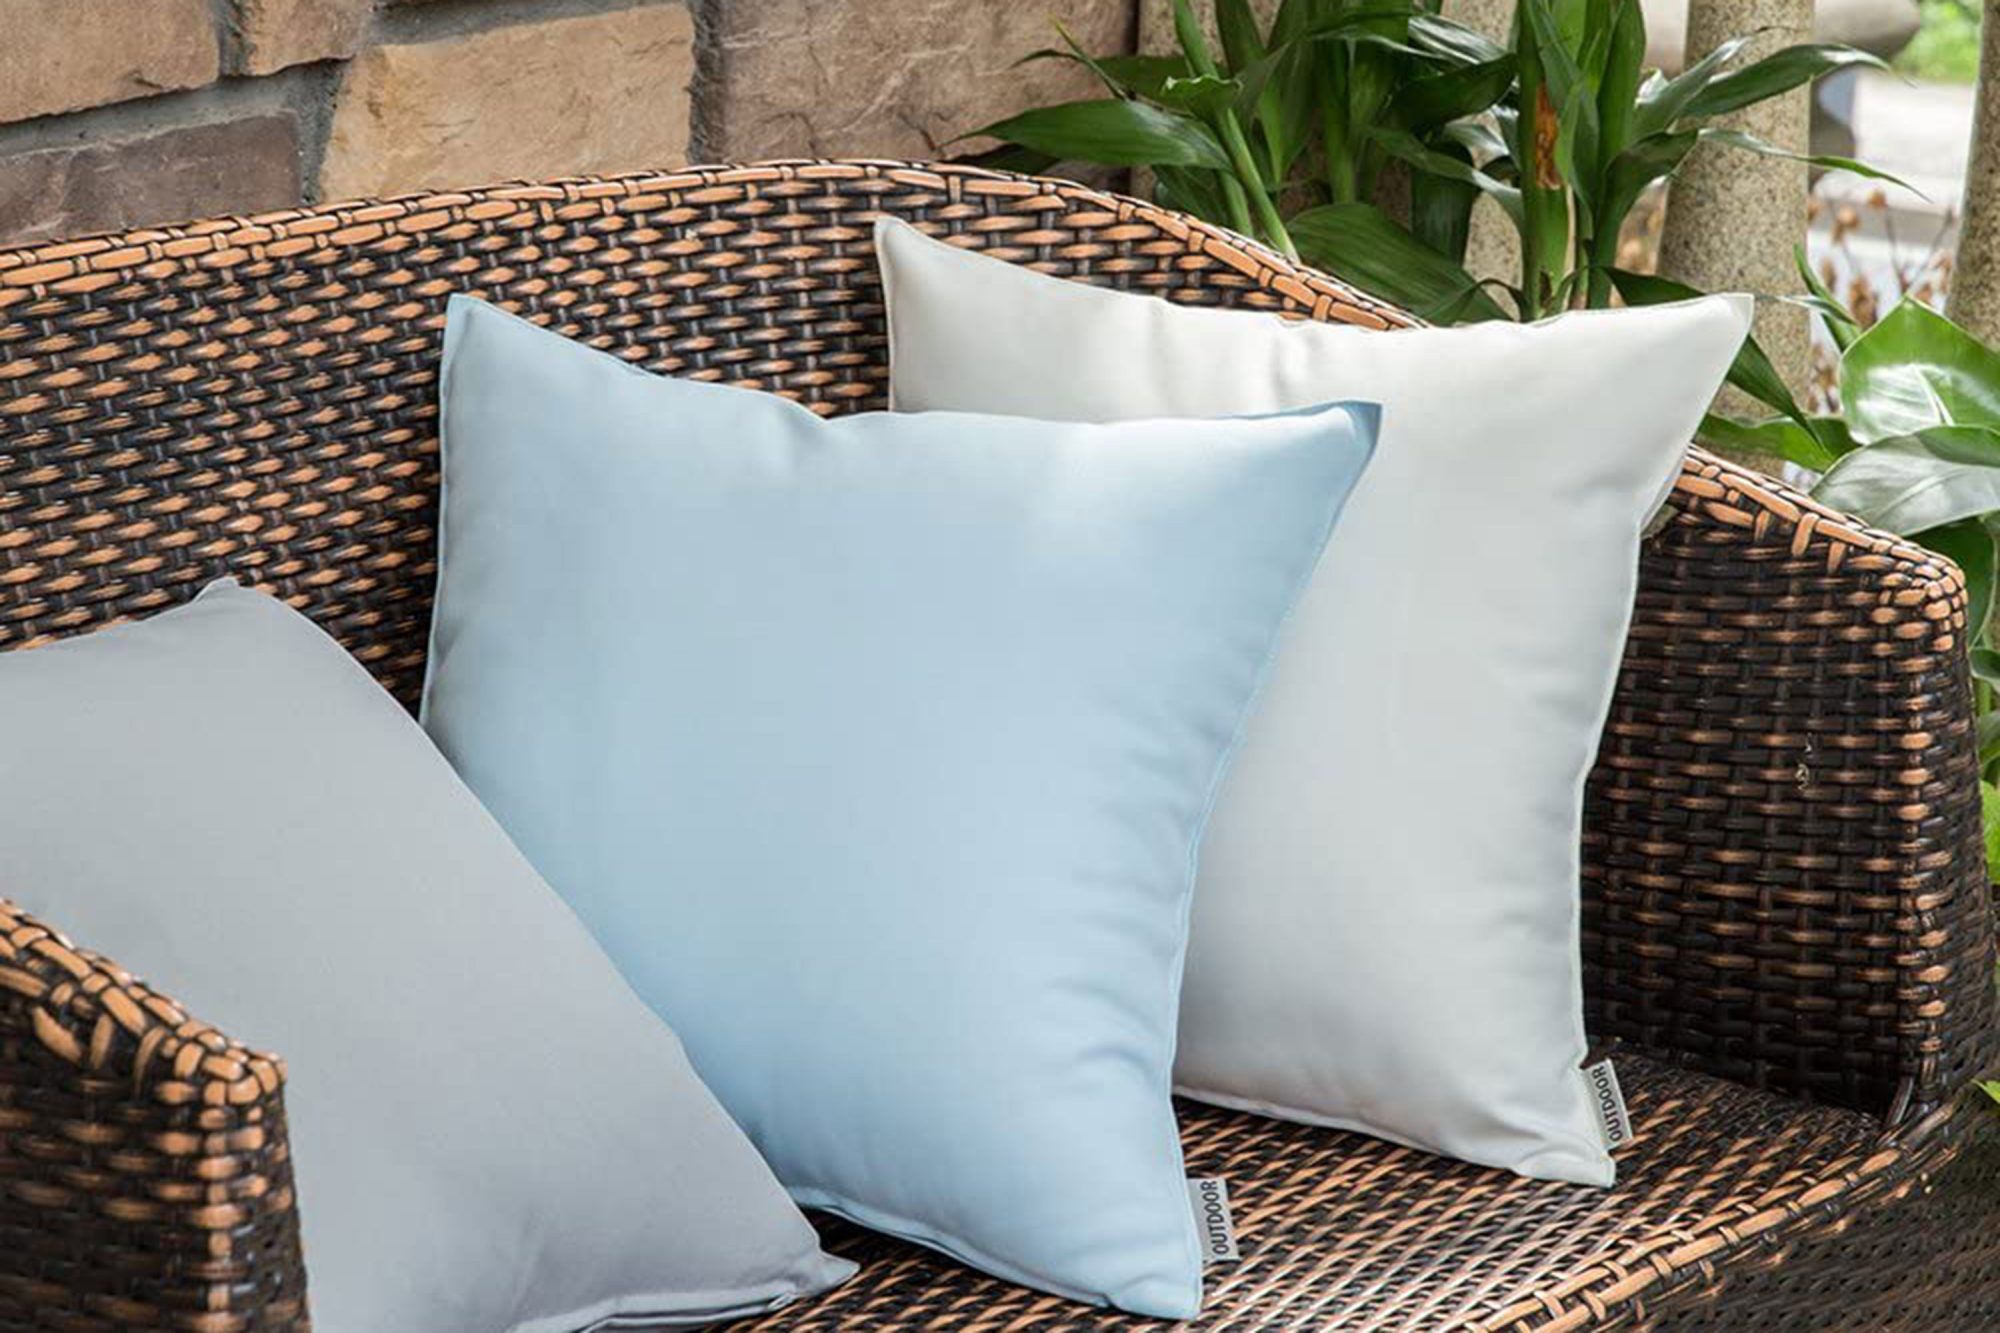 How To Clean Porch Cushions